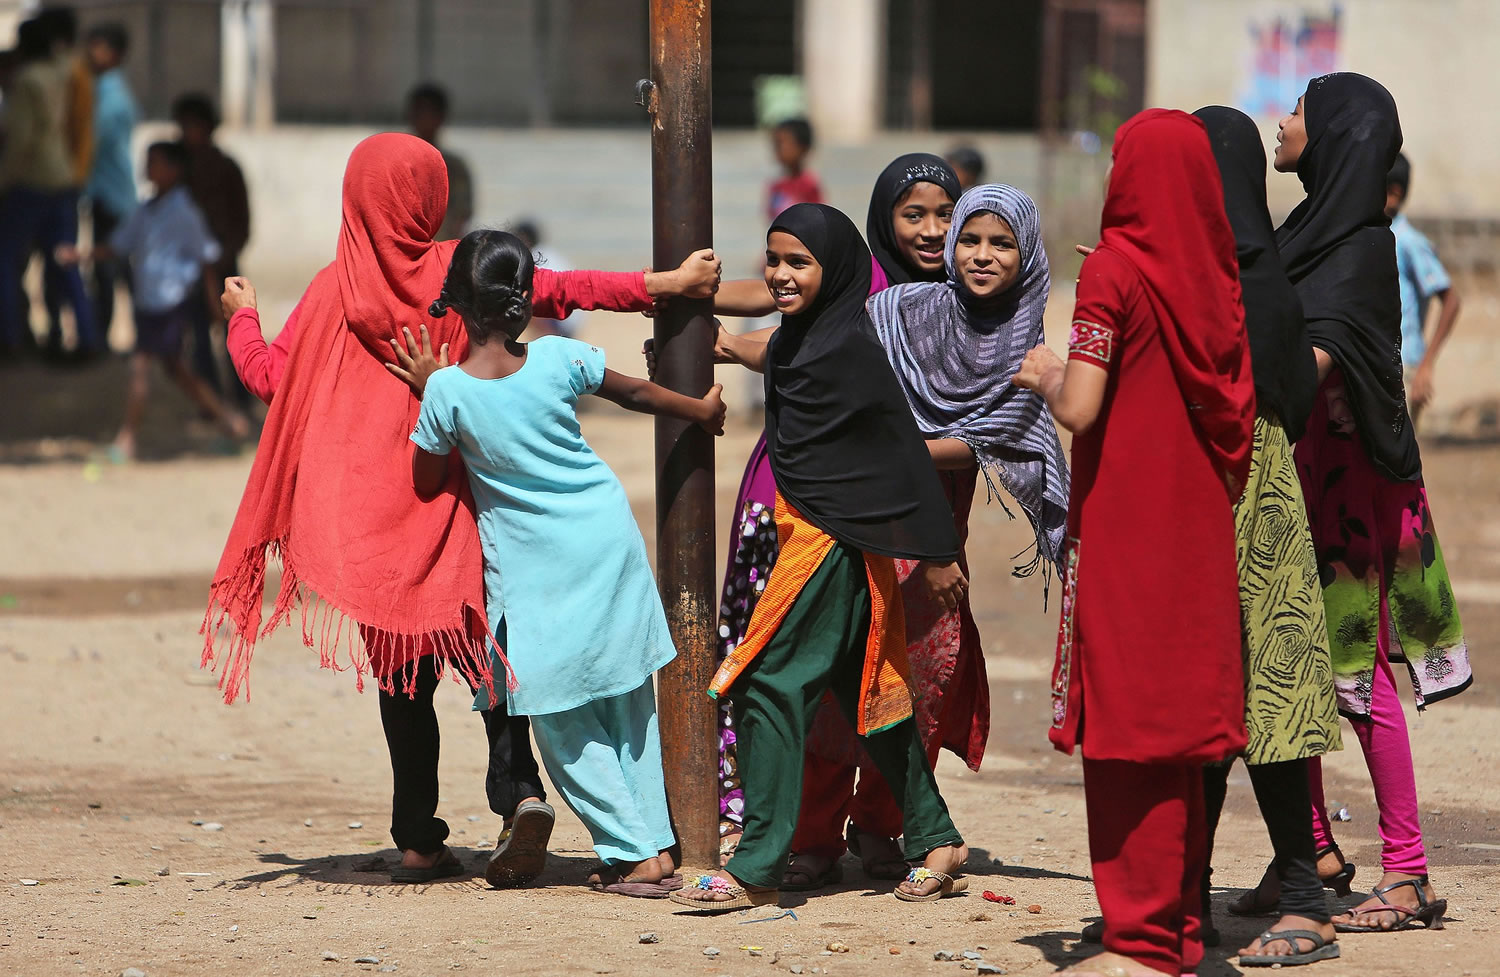 Schoolgirls play at a government school Tuesday in Hyderabad, India.